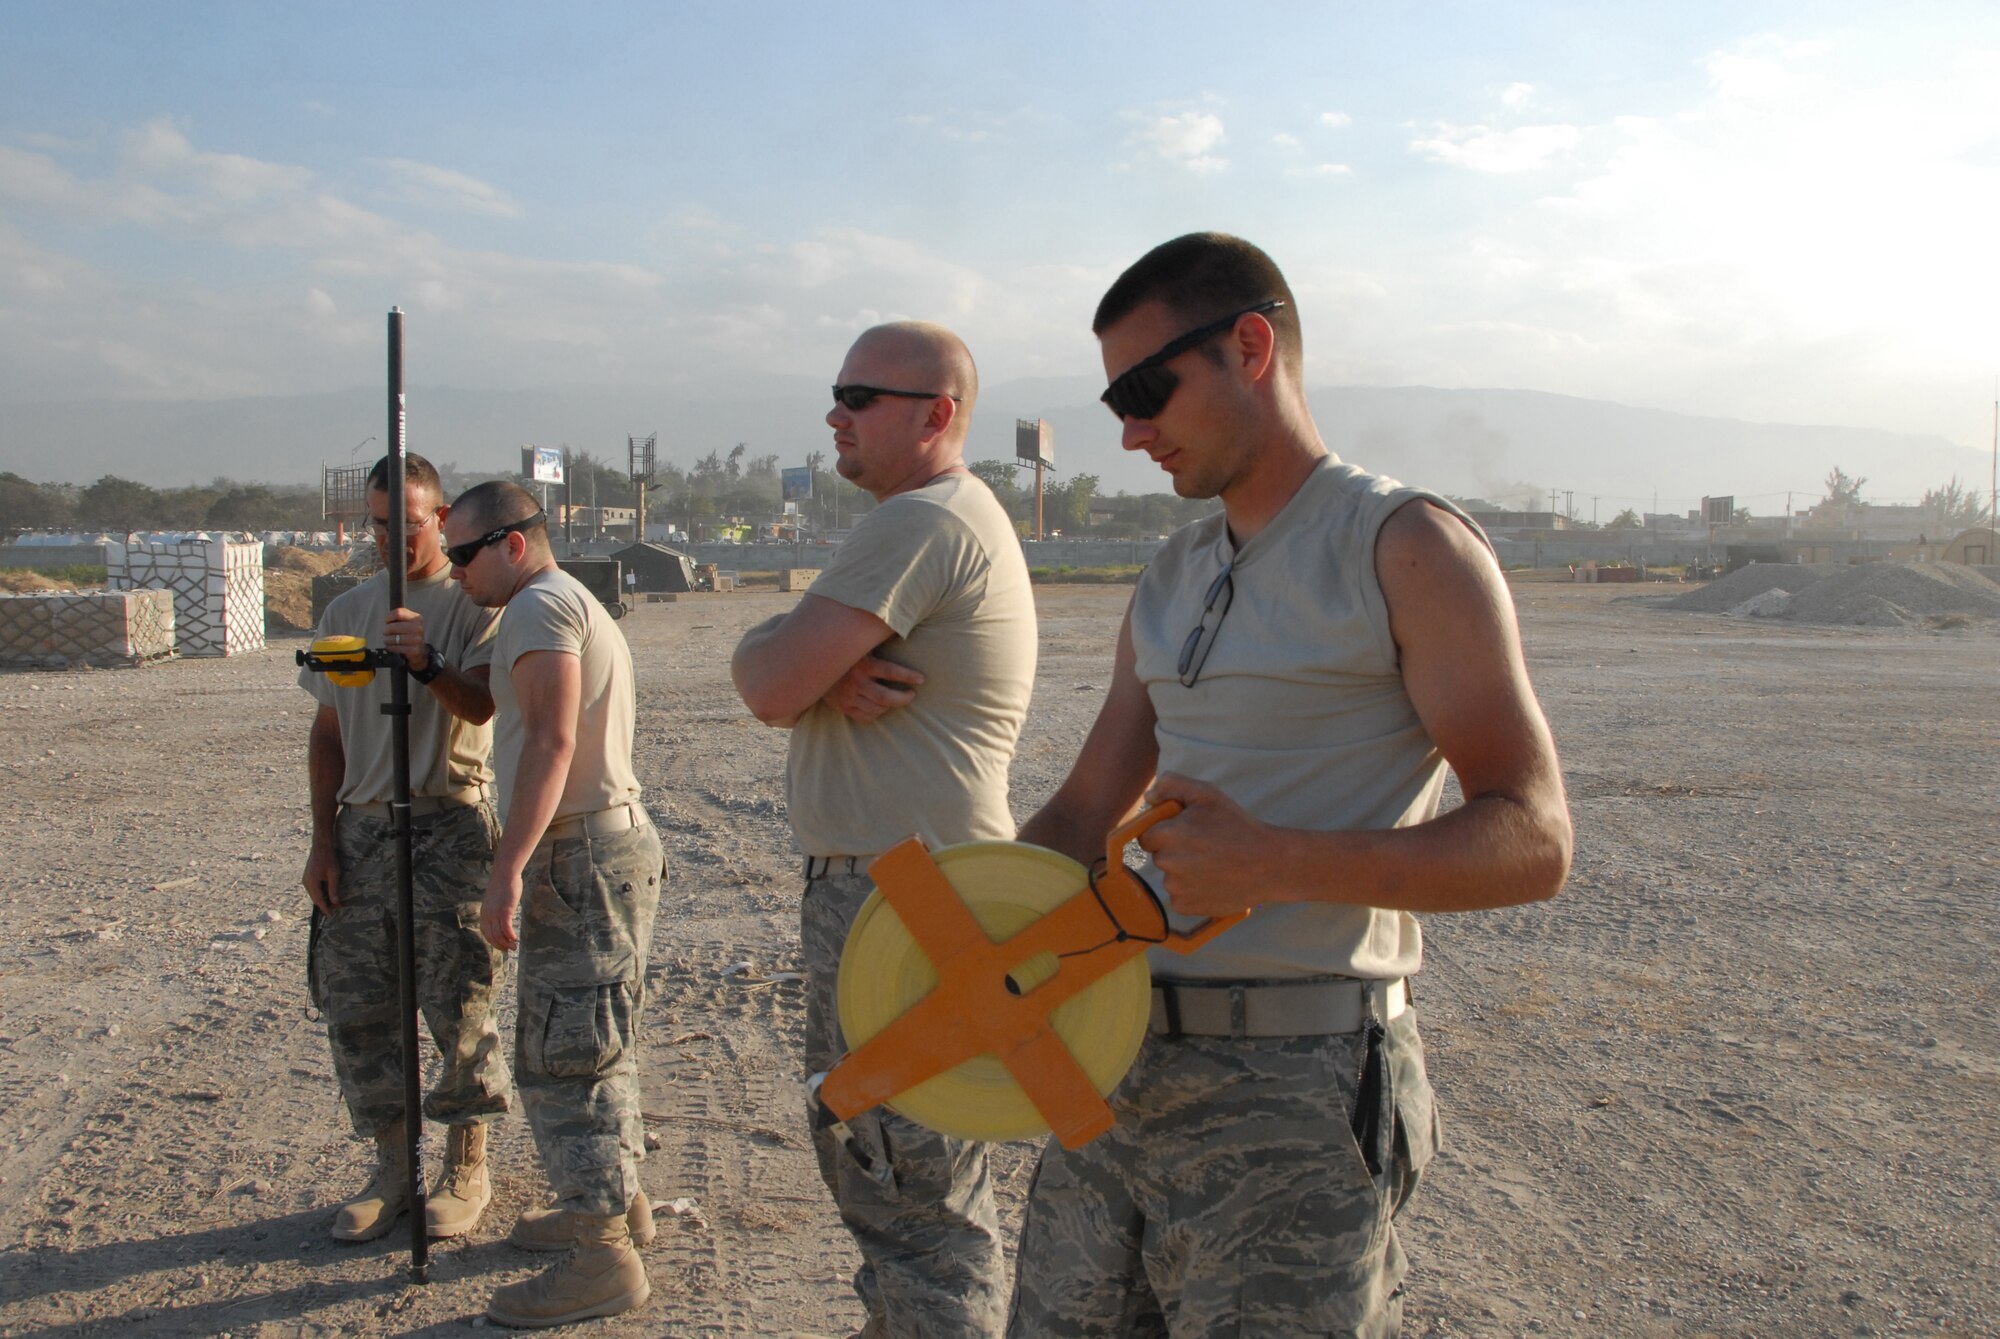 Senior Airman Kristopher P. Stewart (center), and Engineering Assistant with the 190th Air Refueling Wing, Topeka, Ks., rolls a tape measure while working with other members of the Air Force to survey the Port- au-Prince airport.  Stewart is one of 46 members of the Kansas Air National Guard that deployed to Haiti to build support infrastructure, including an Expiditionary Medical Support (EMEDS) support hospital.